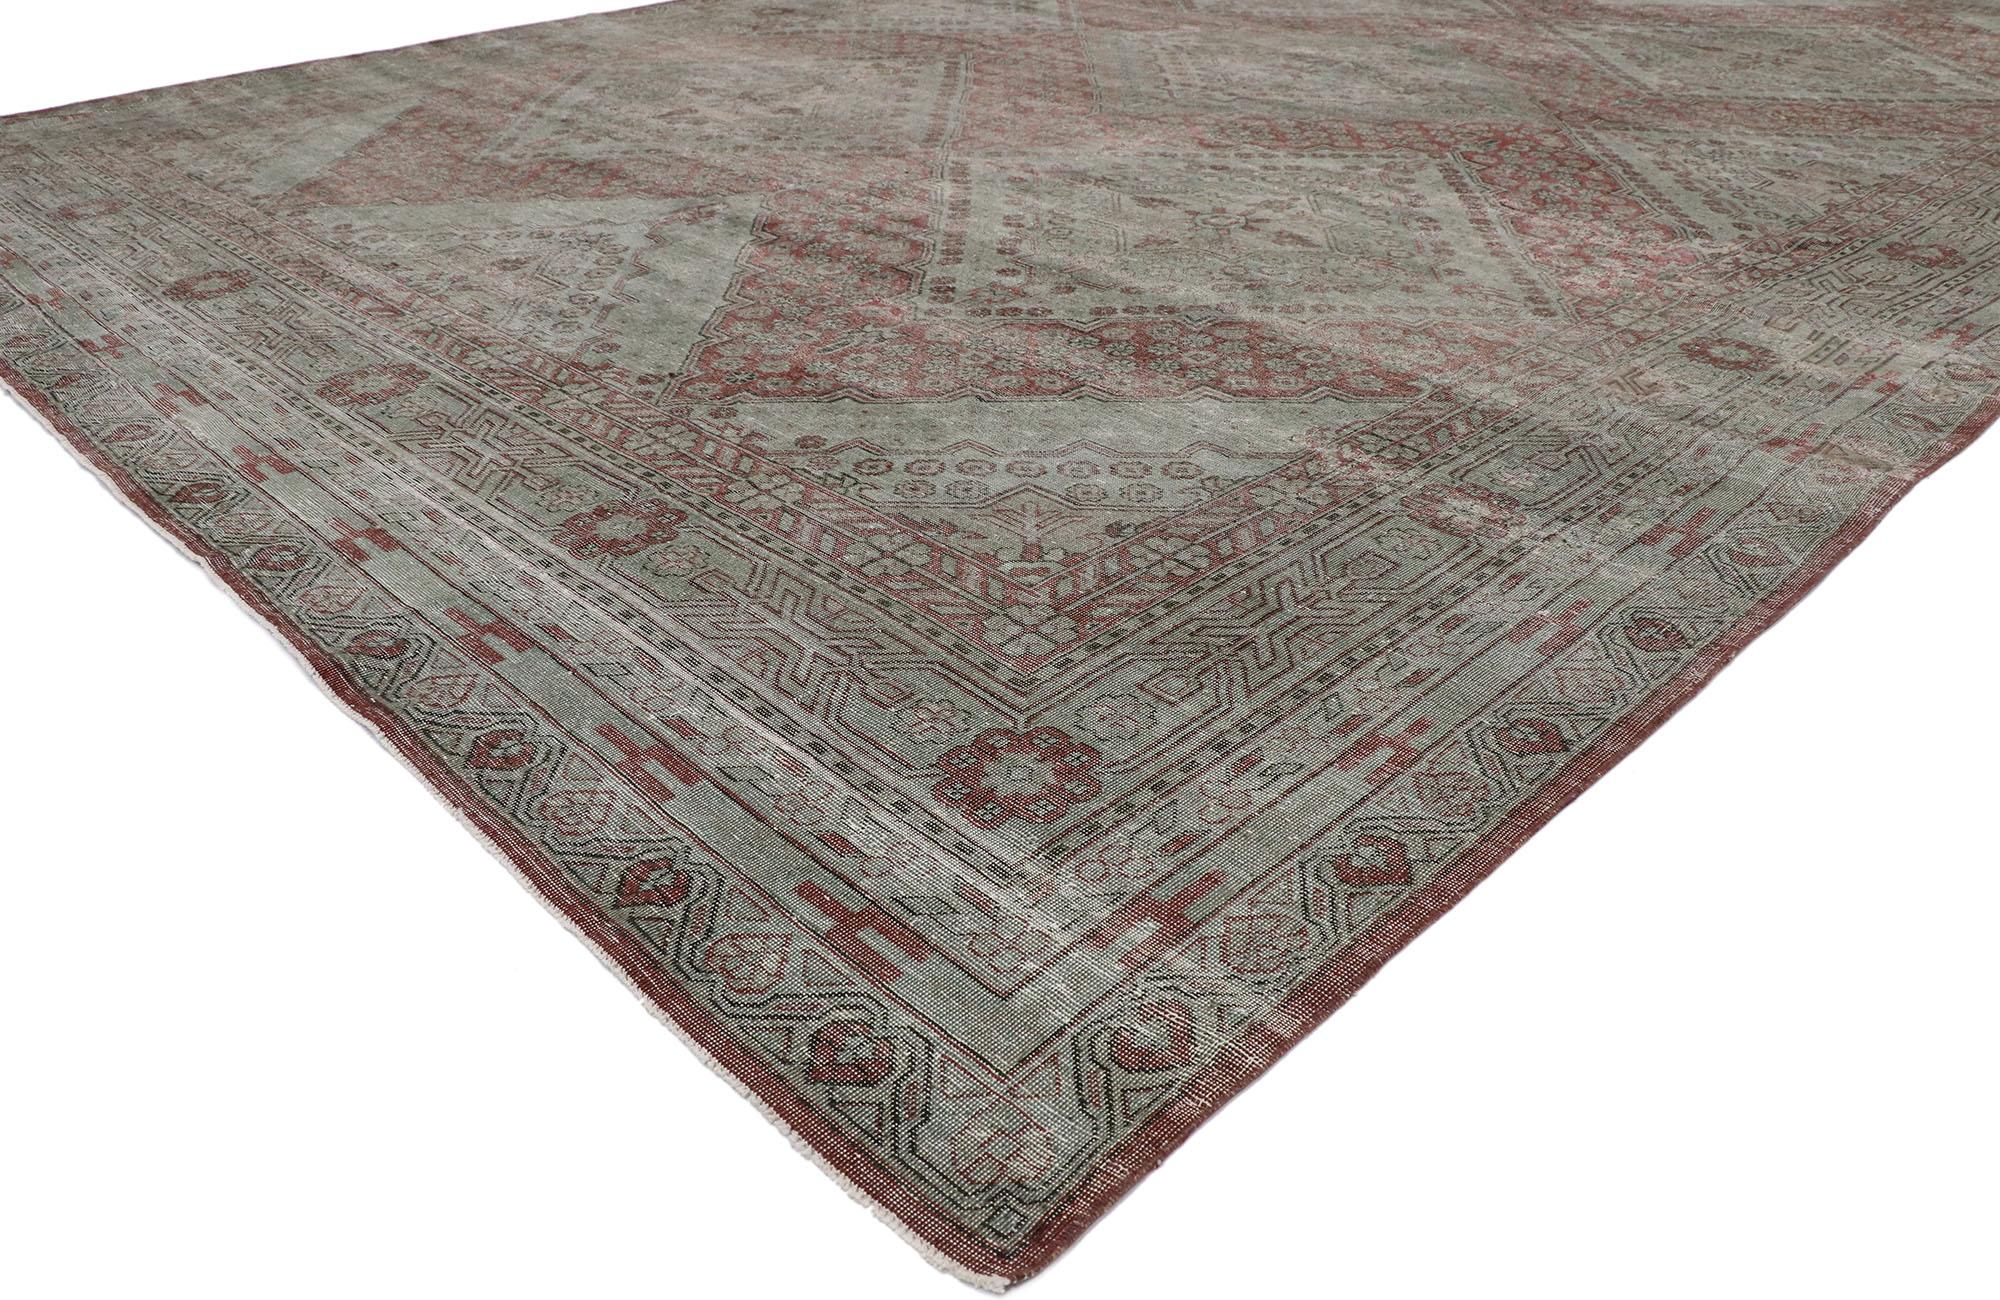 53248 Distressed Antique Persian Khotan rug with American Colonial Williamsburg style. With timeless appeal and fine craftsmanship with rustic sensibility, this hand knotted wool distressed antique Persian Khotan rug beautifully embodies American